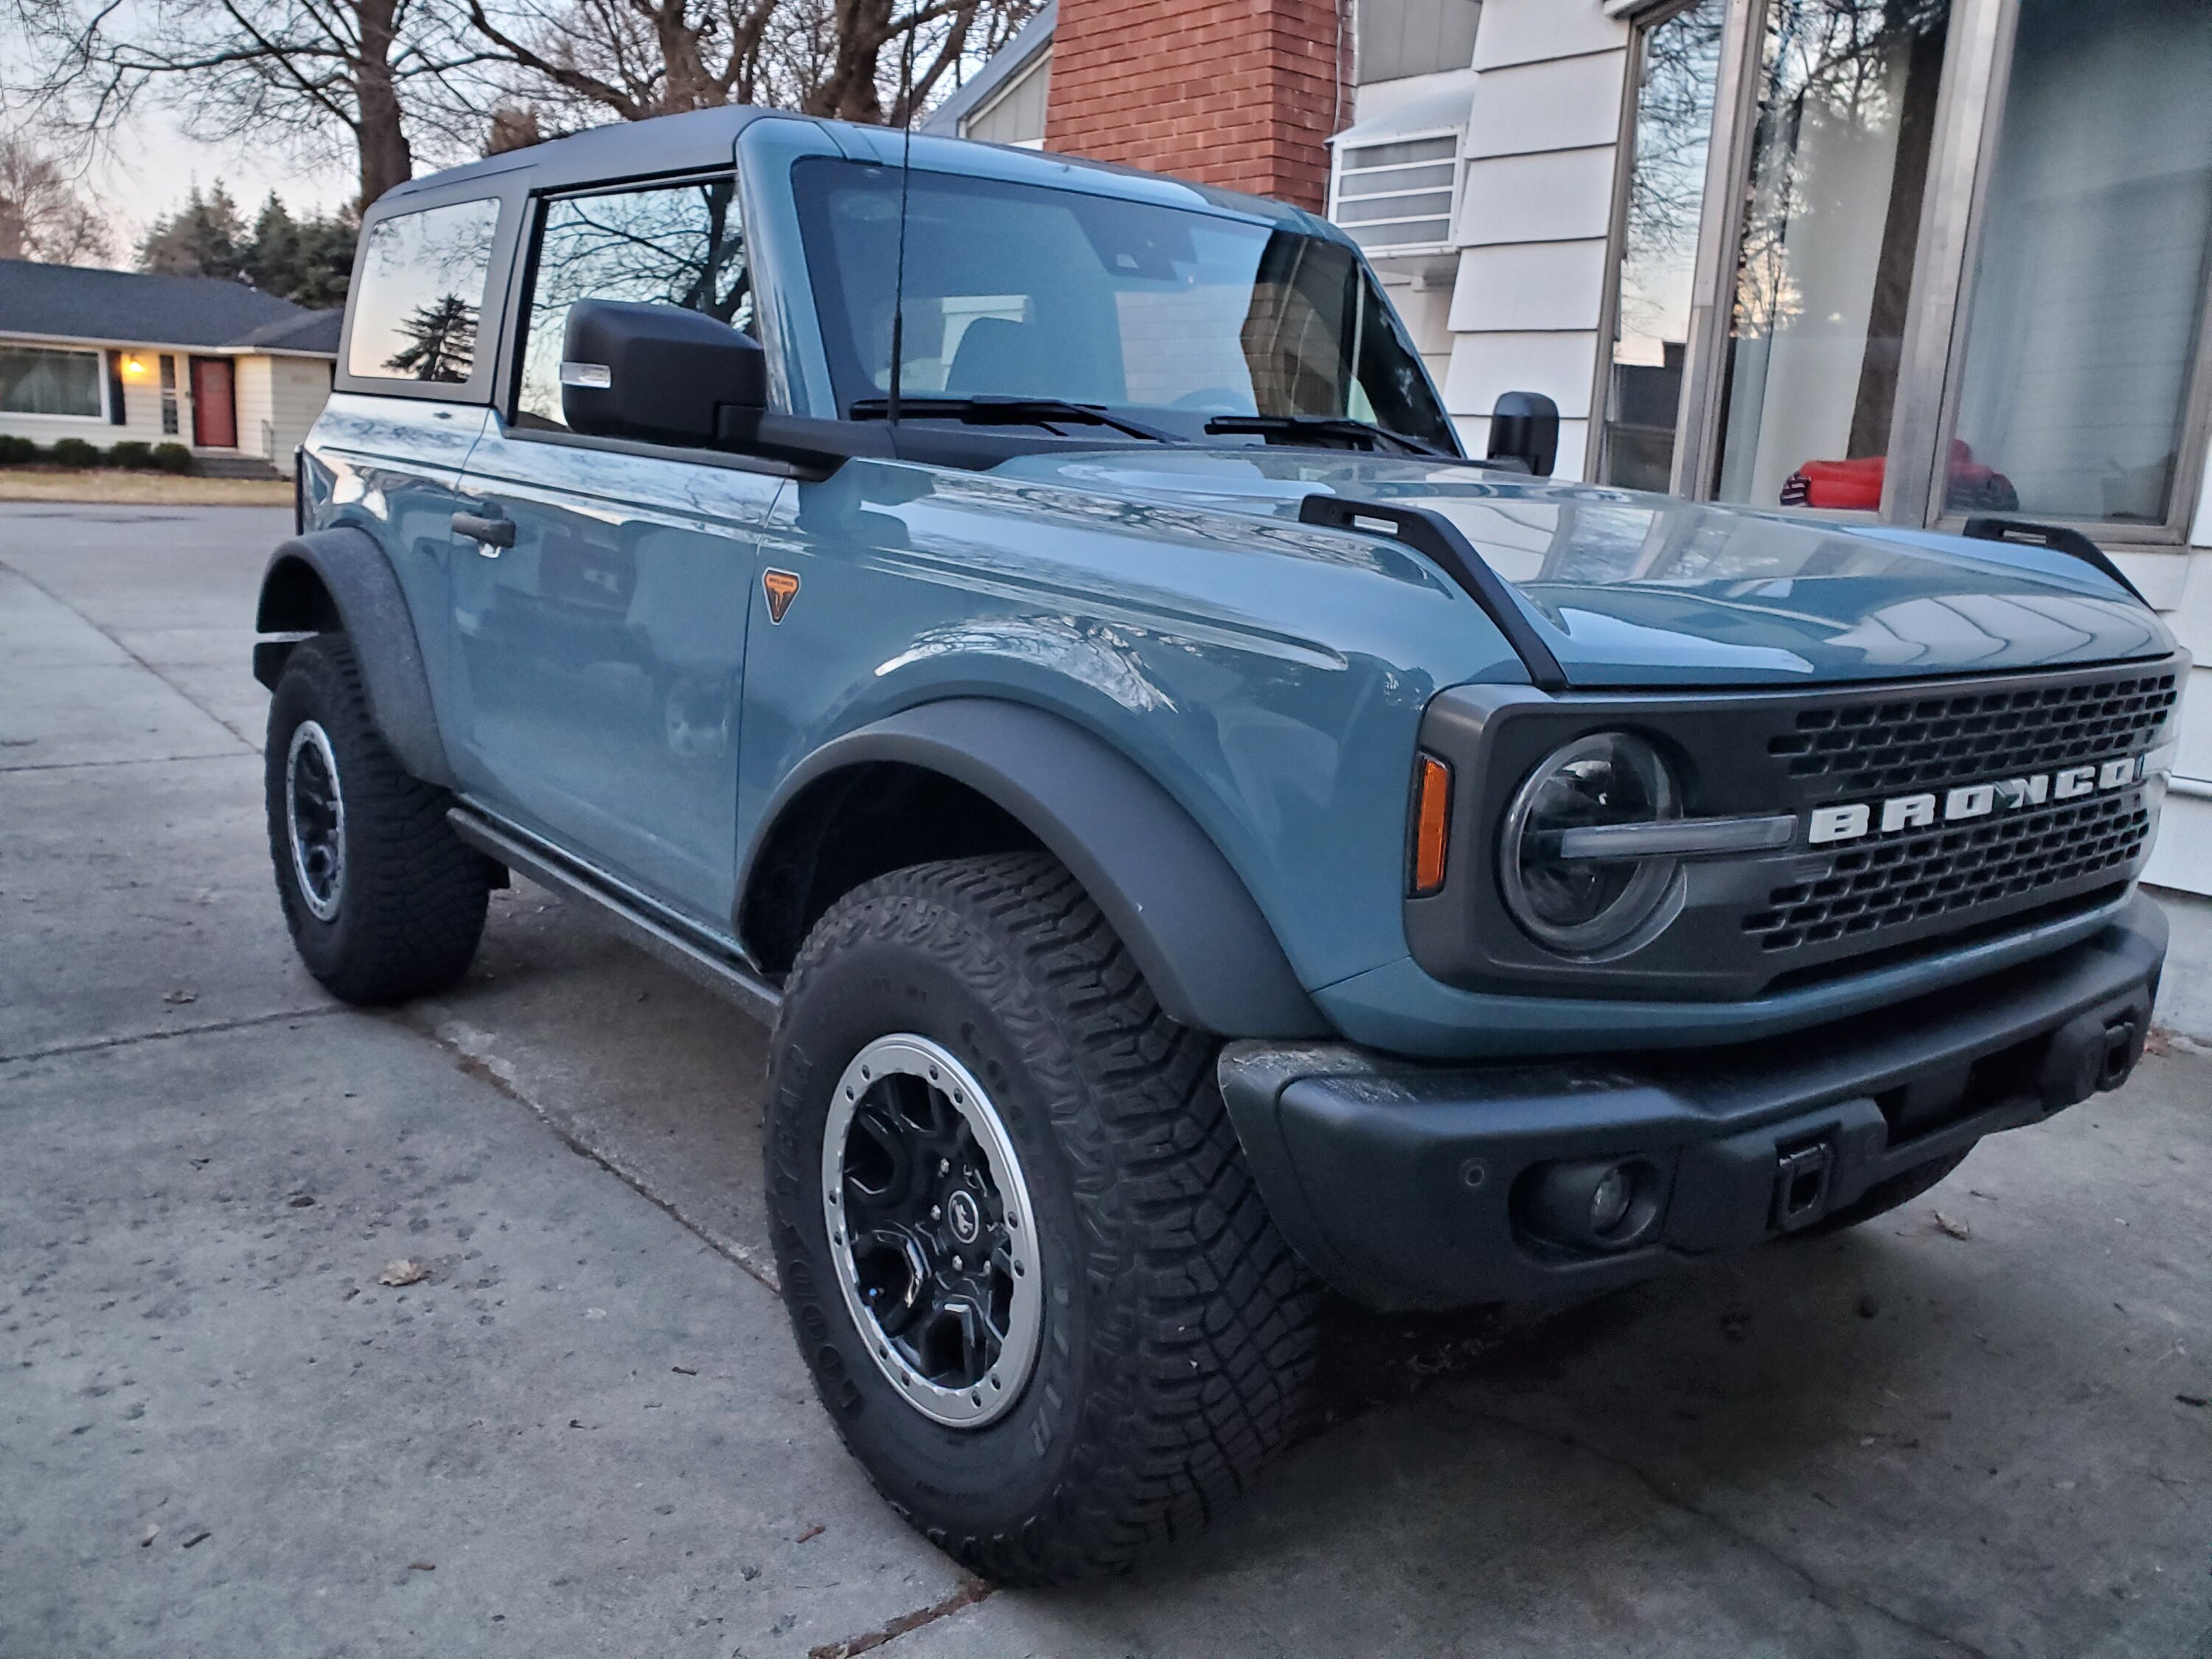 Ford Bronco 964 Days and now delivered, how many more July 2020 order holders still? 20230326_191205